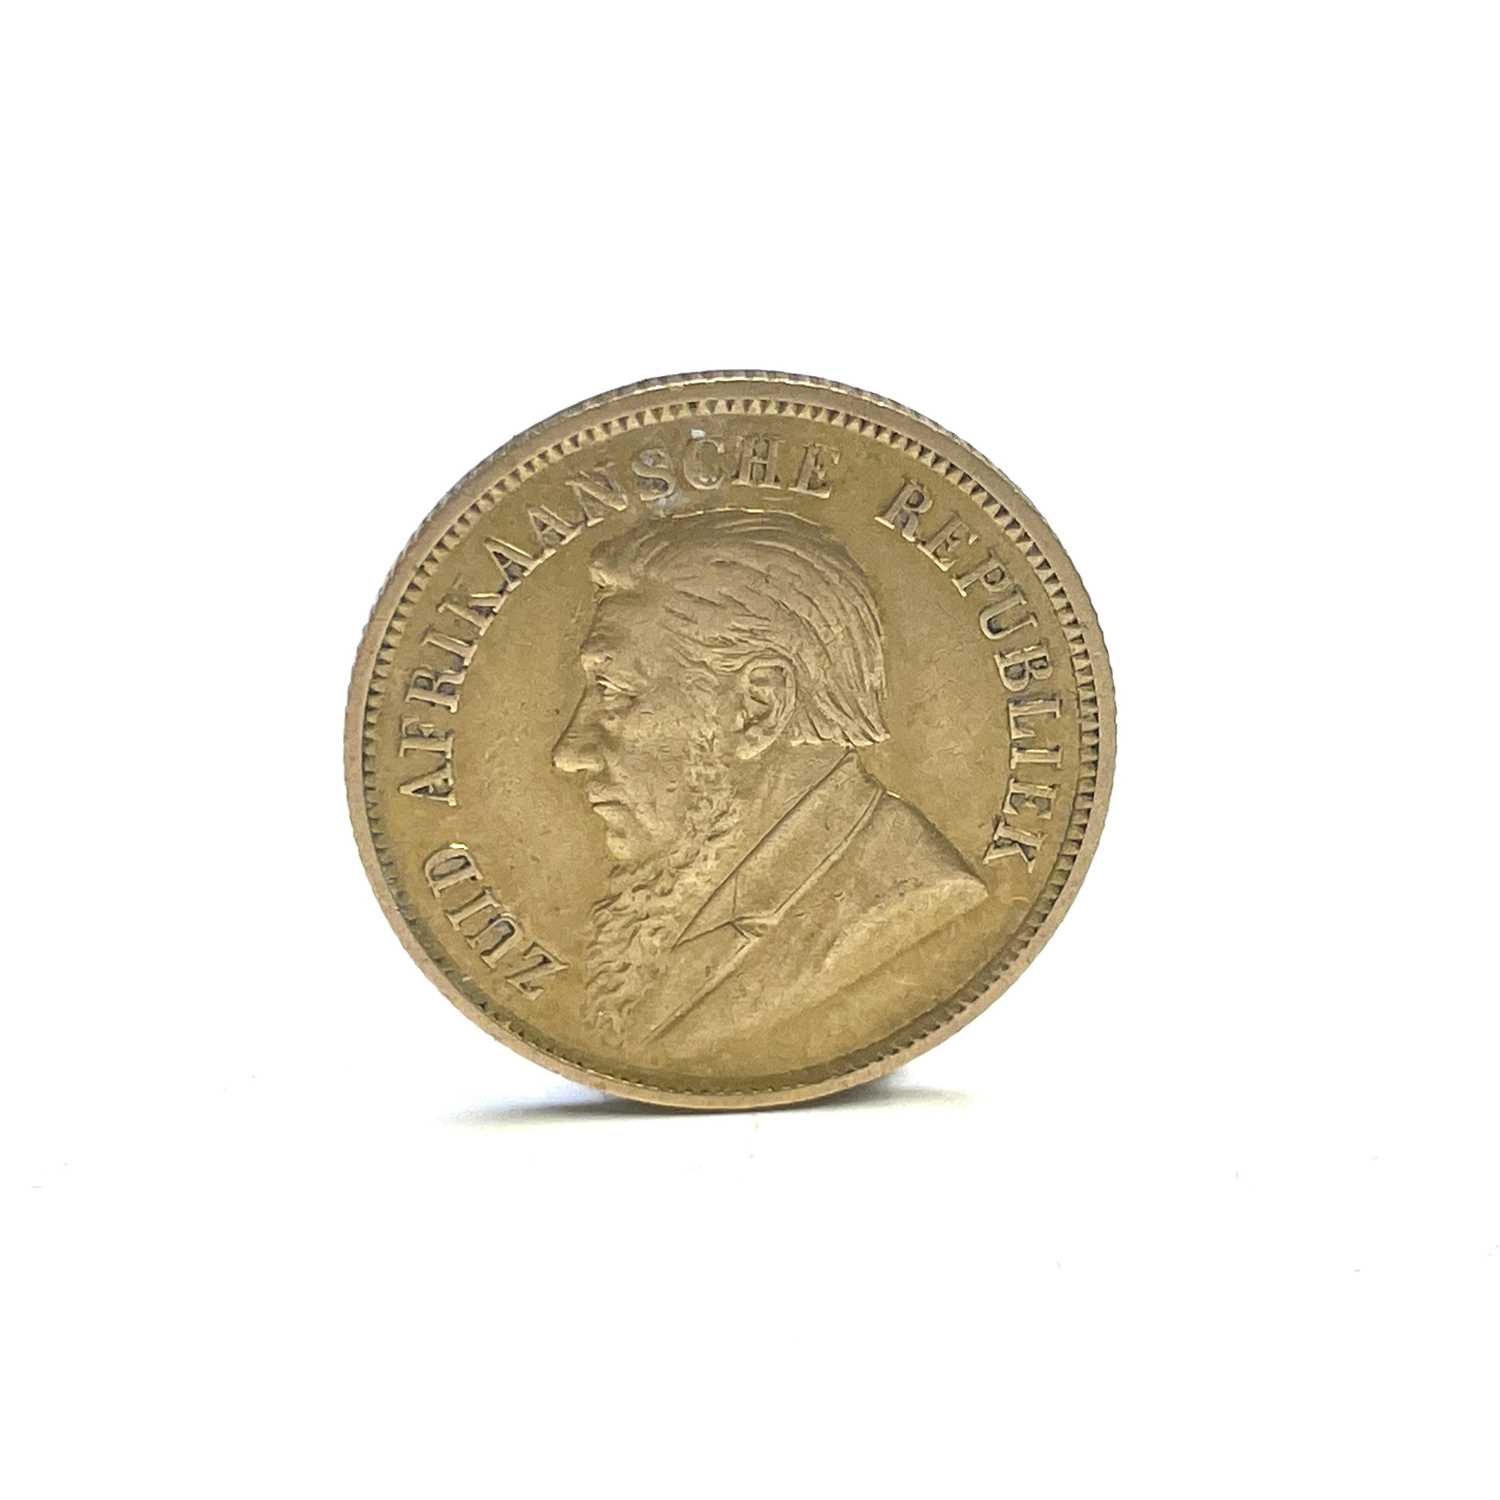 South Africa - Gold 1/2 Pond. A 1897 Gold Half Pond coin featuring President Kruger to obverse. Only - Image 2 of 2